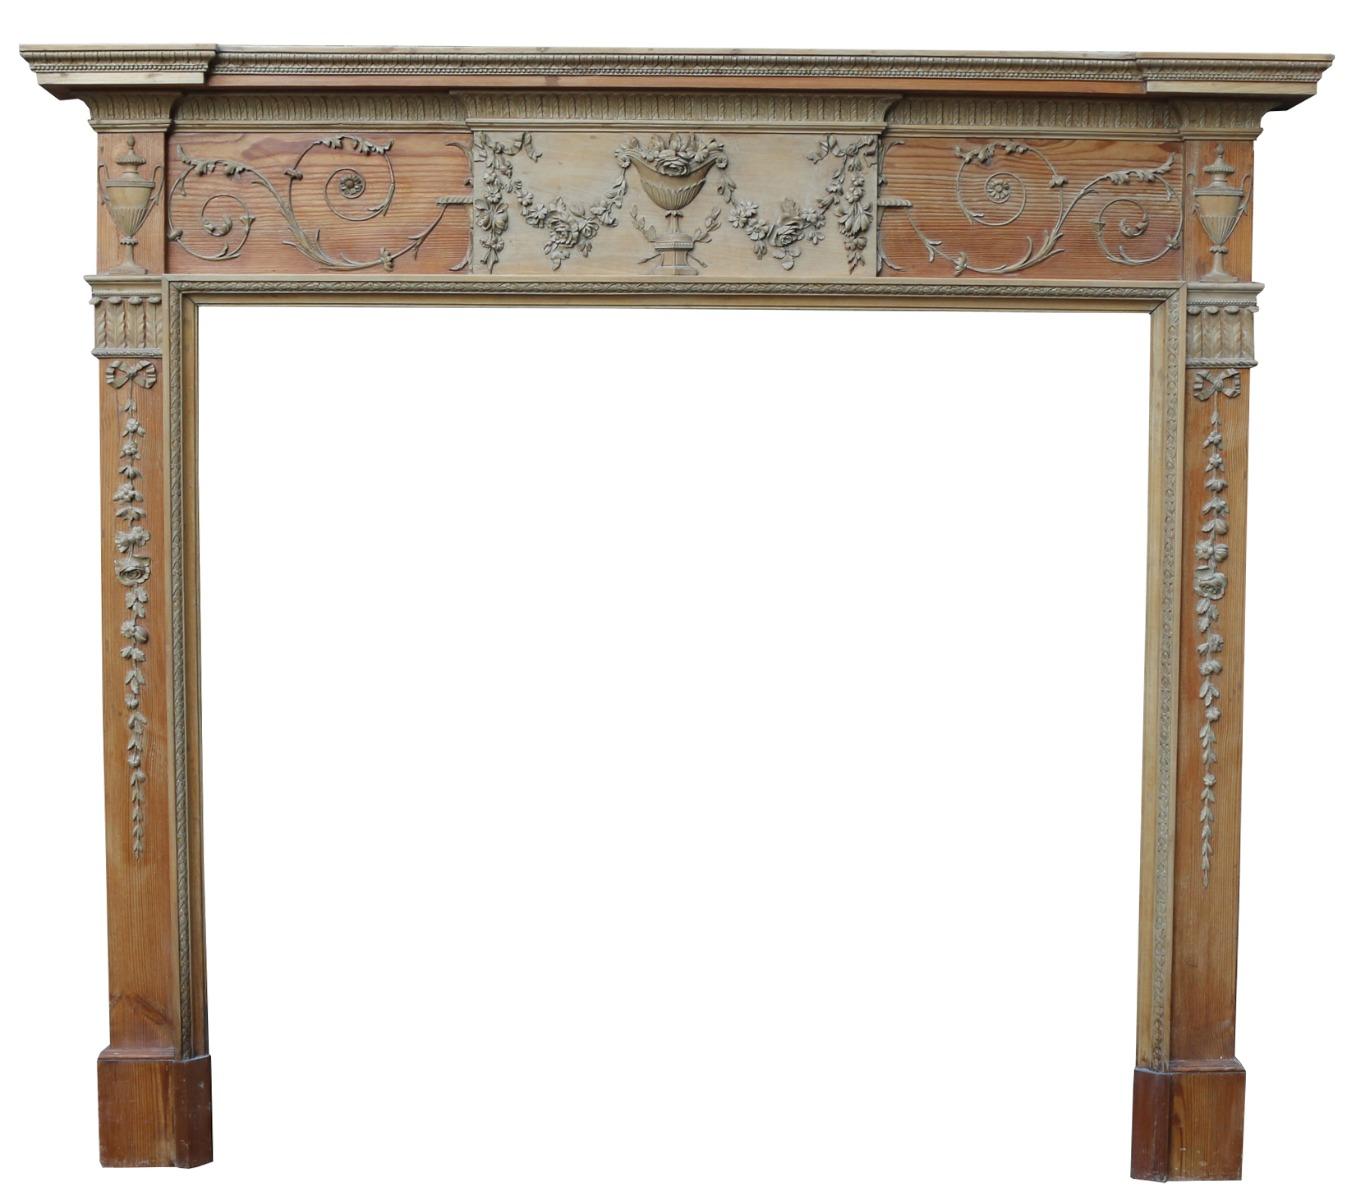 This beautiful fire surround was removed from a private residence in Harrogate. A superb example, without doubt the cleanest we have seen. In The Adam Style. Pine structure with lime wood carvings throughout

Additional dimensions:

Opening